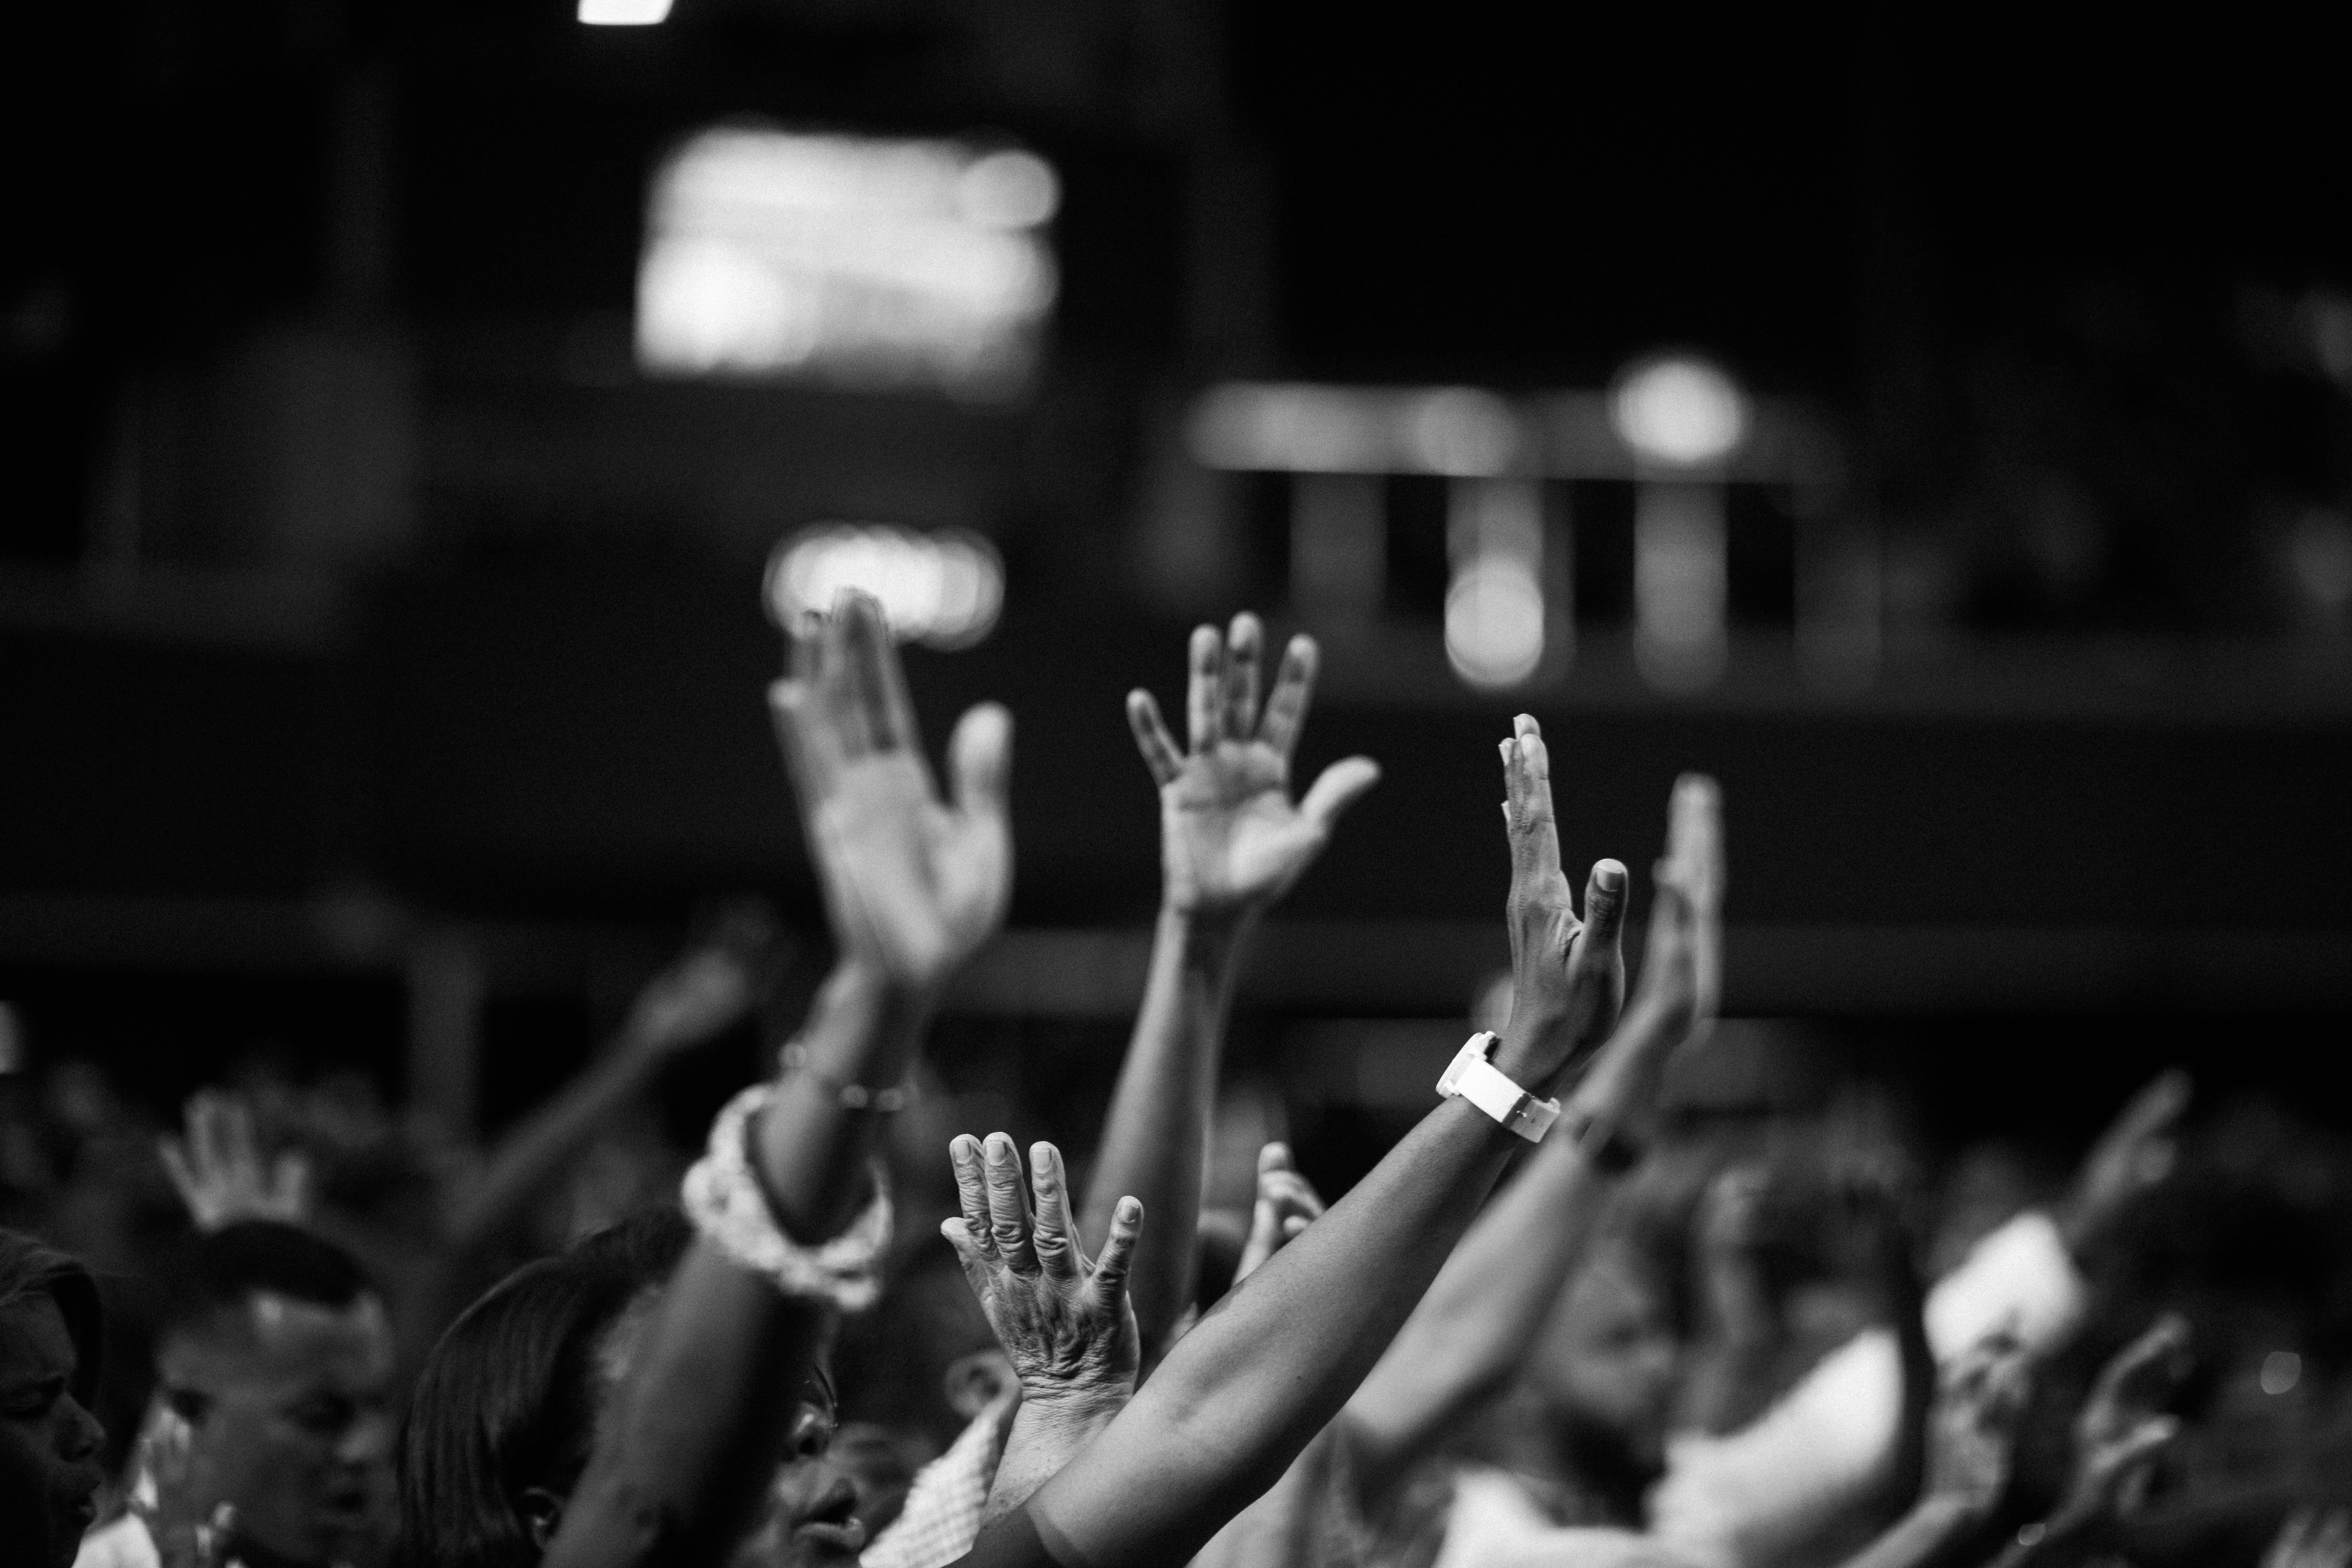 grayscale-photography-of-people-raising-hands-2014775.jpg